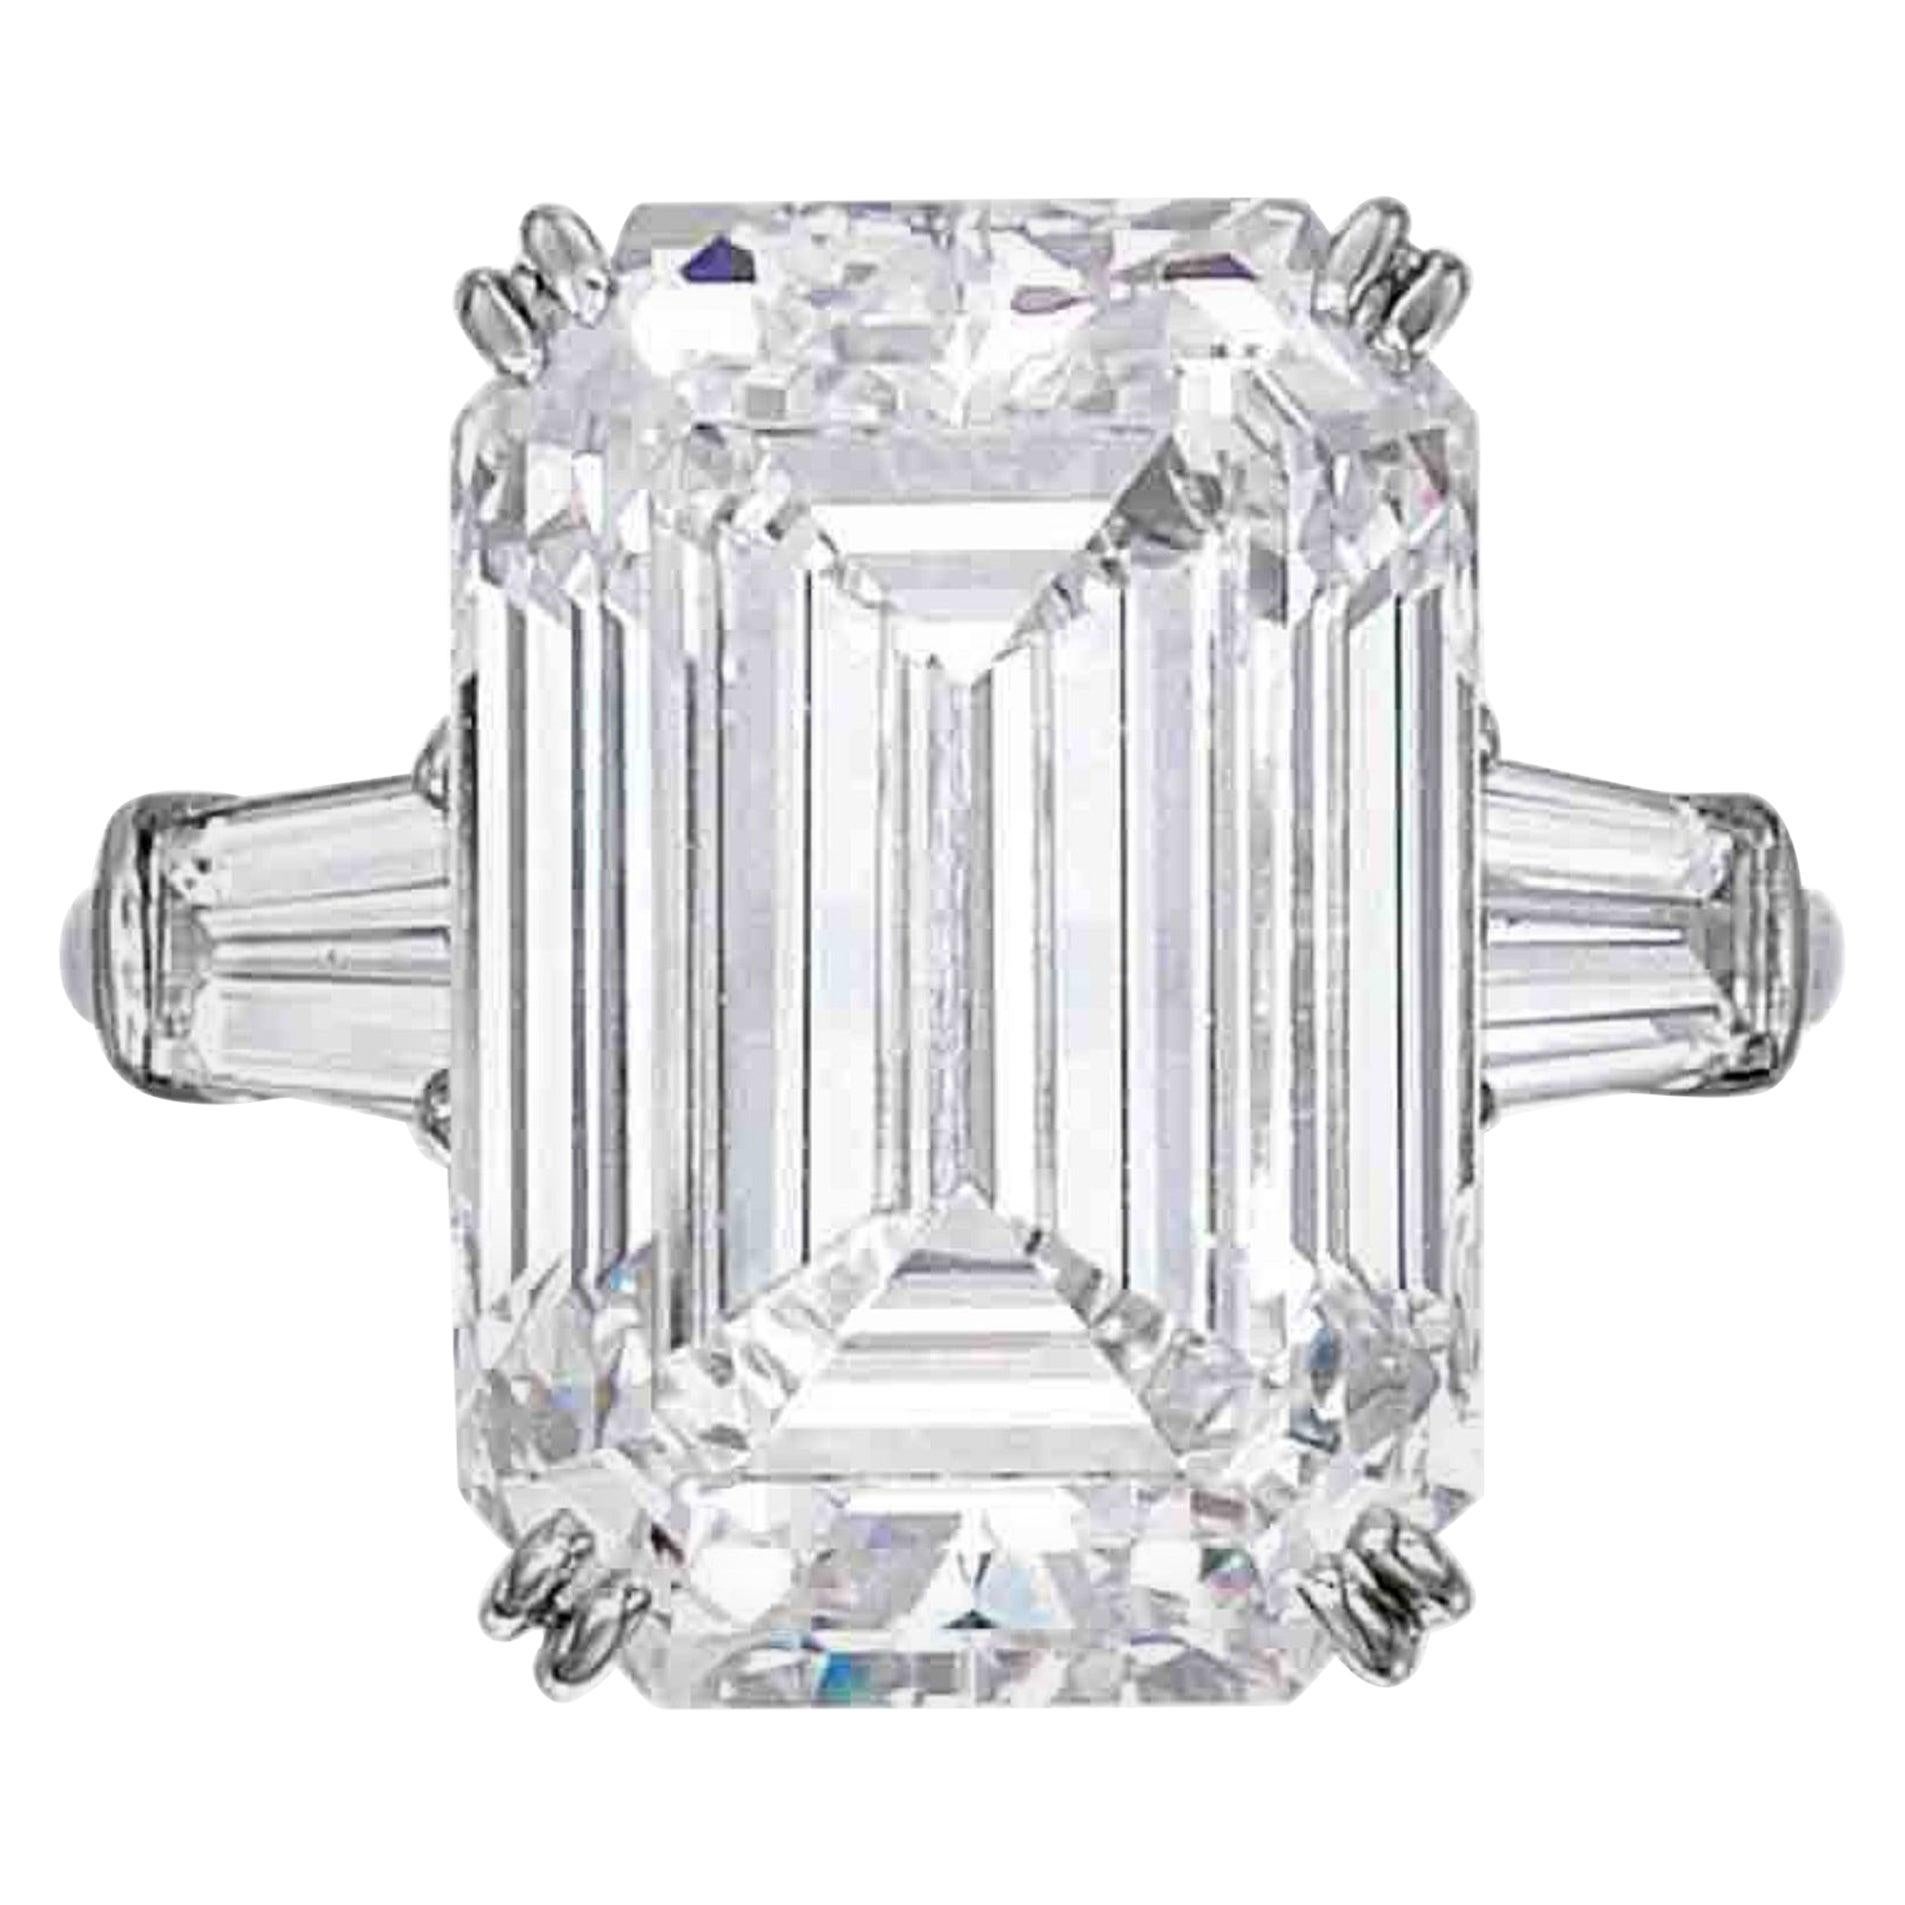 GIA Certified 4 Carat Elongated Emerald Cut Tapered Baguettes Diamond Ring 